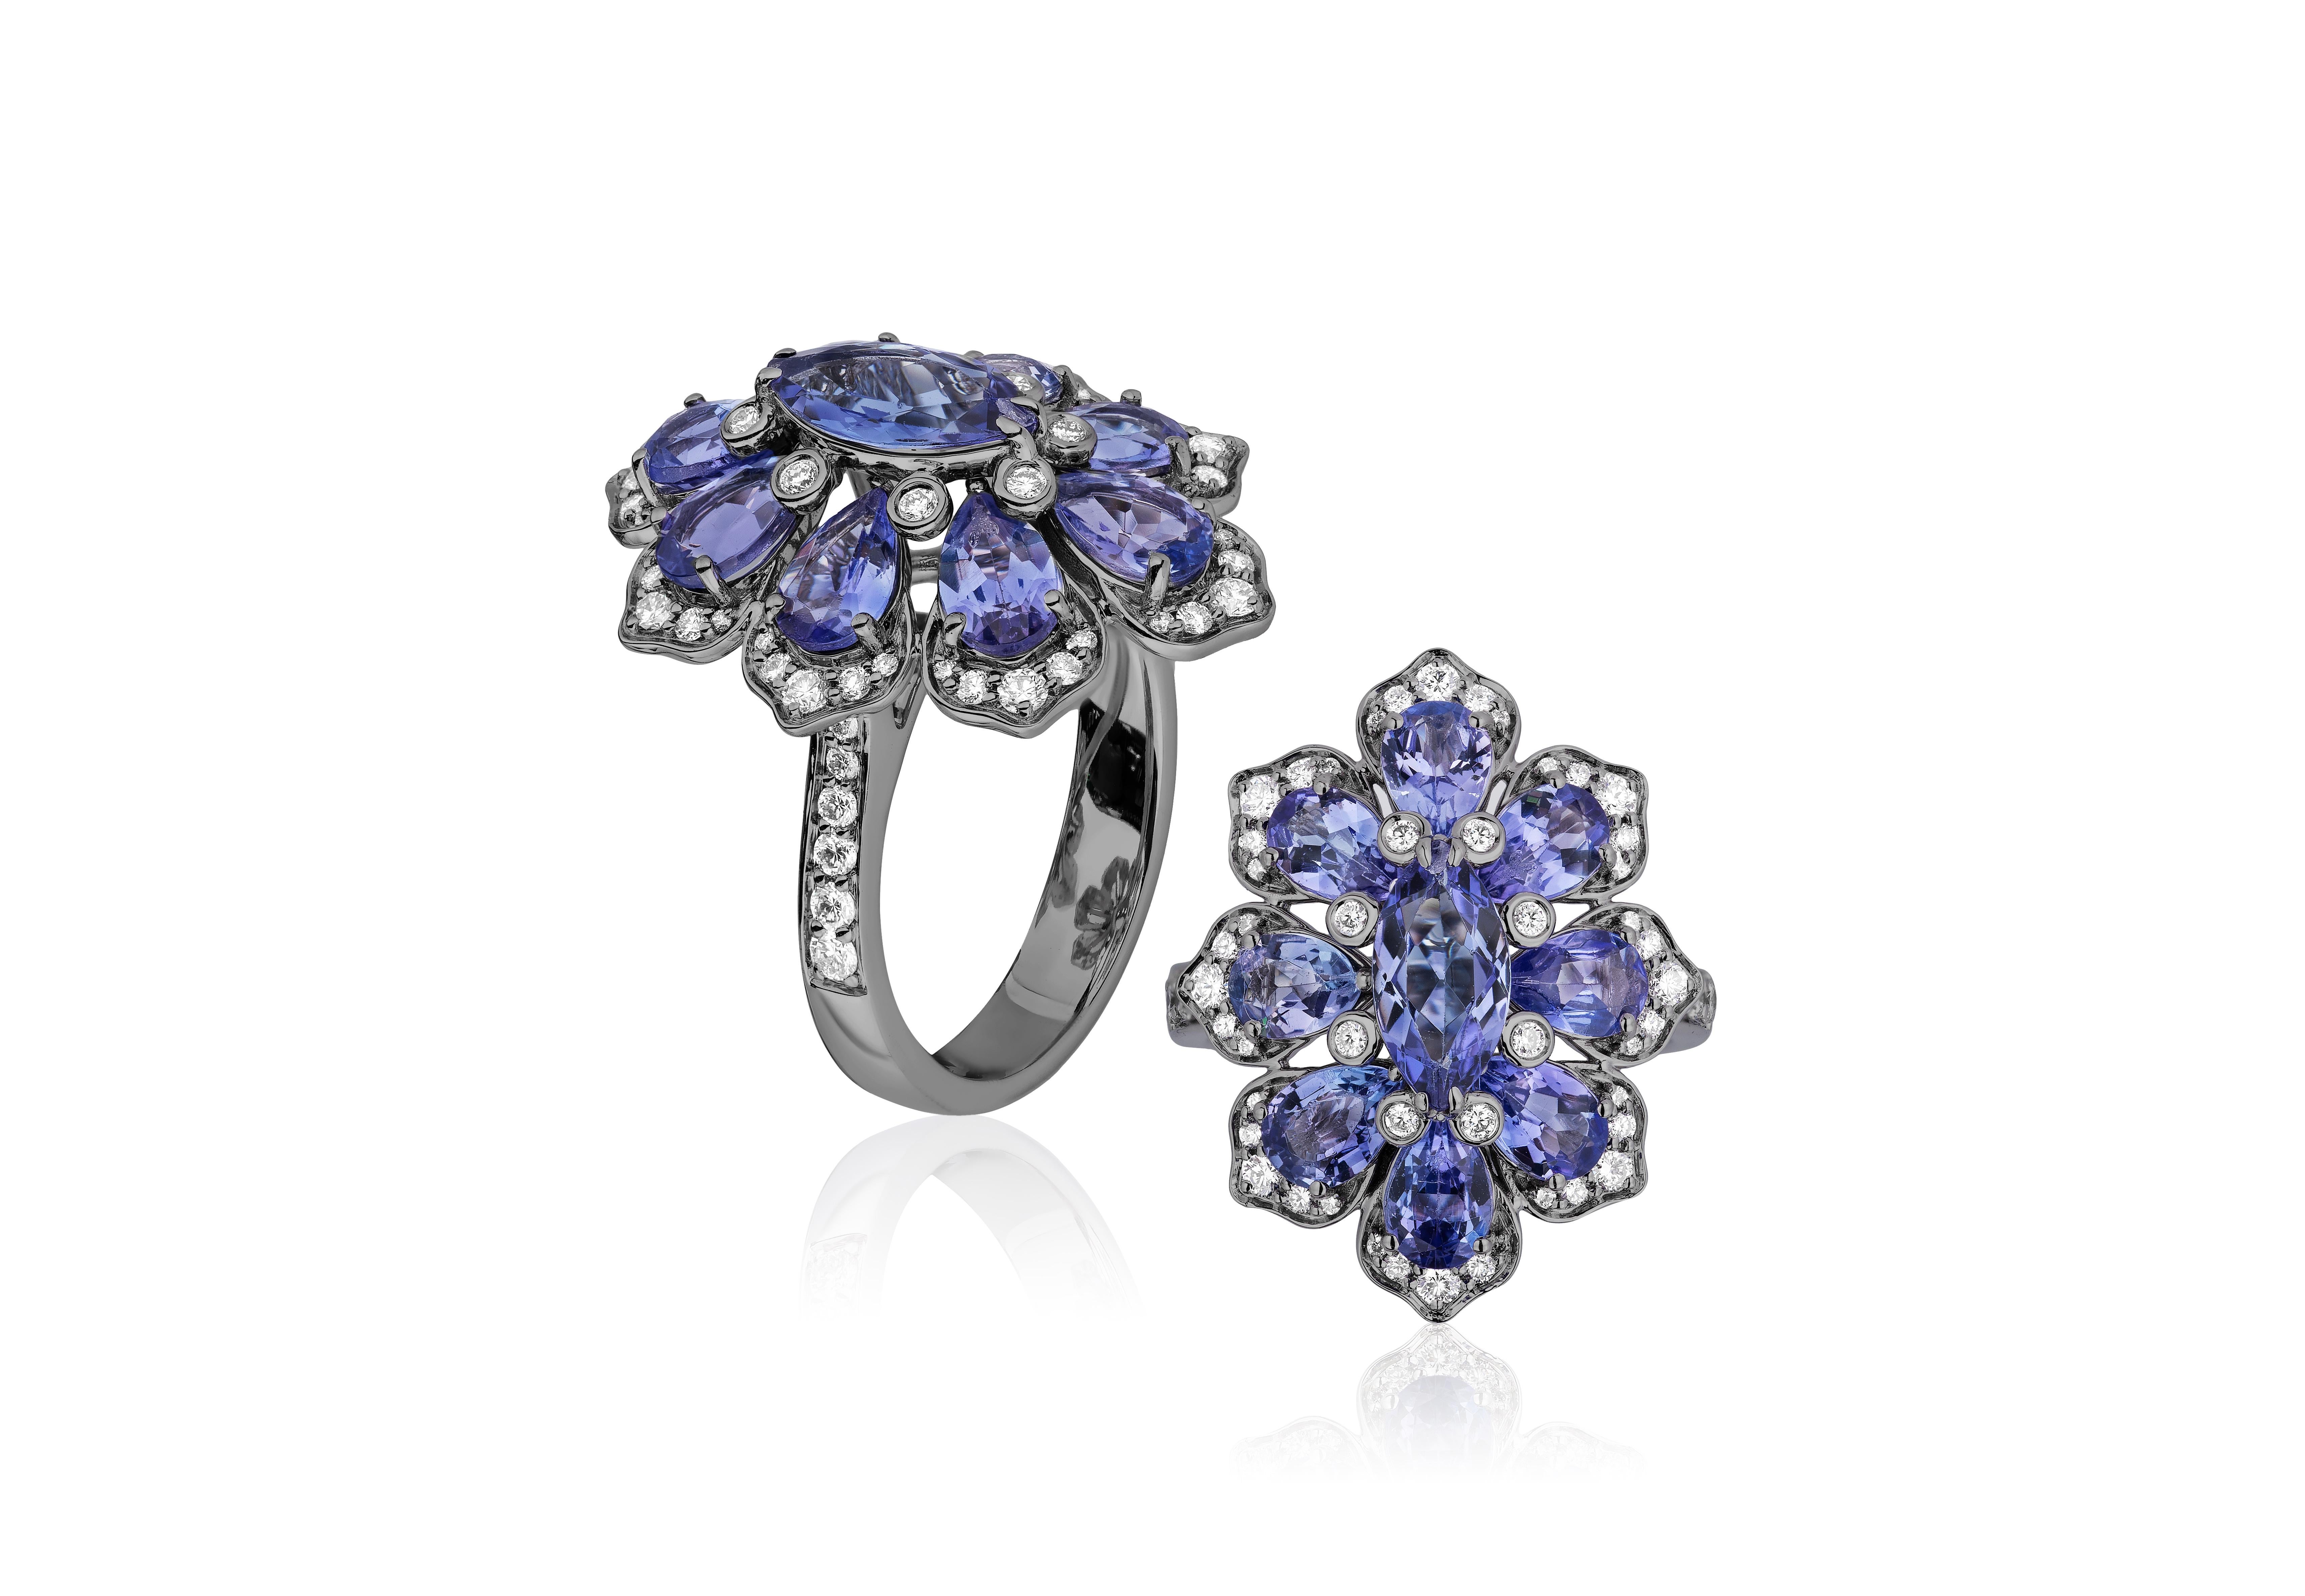 This is a magnificent Tanzanite Ring with Diamonds in 18K White Gold with Rhodium, from our 'G-One' Collection. A unique piece that will make you stand out.

* Gemstone: 100% Earth Mined 
* Approx. gemstone Weight: 3.89 Carats (Tanzanite)

* 100%